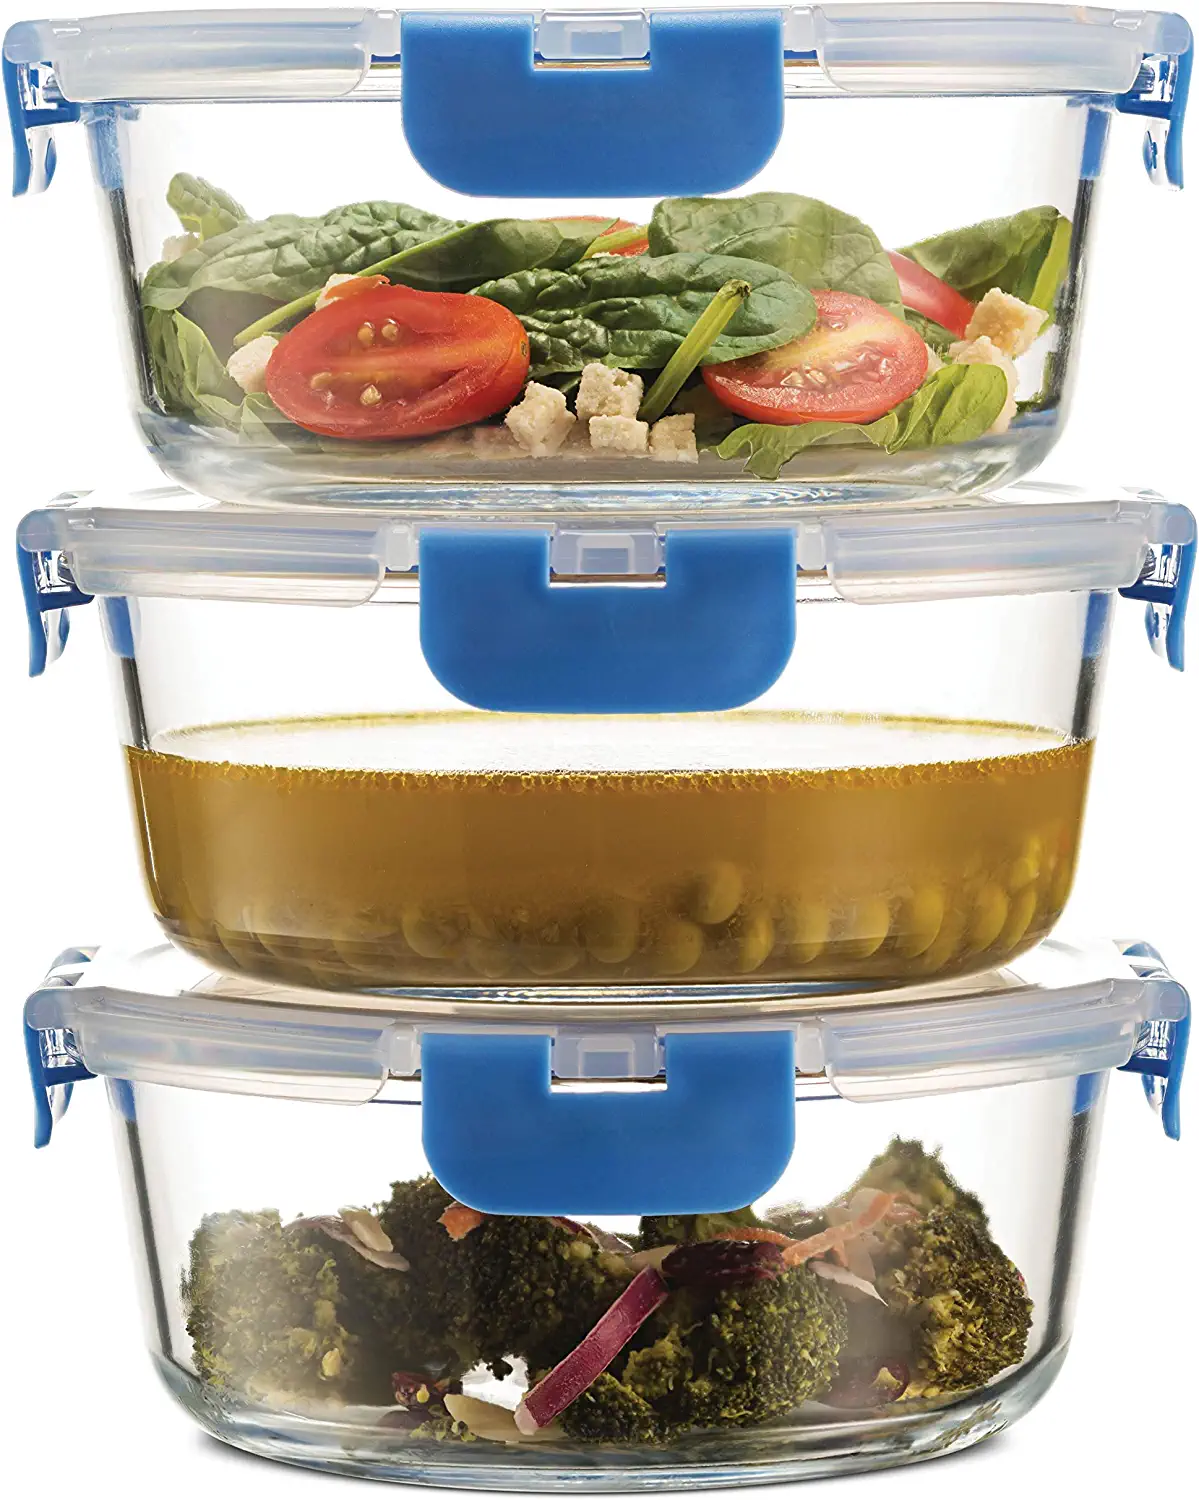  C CREST Glass Meal Prep Containers, [10 Pack] Glass